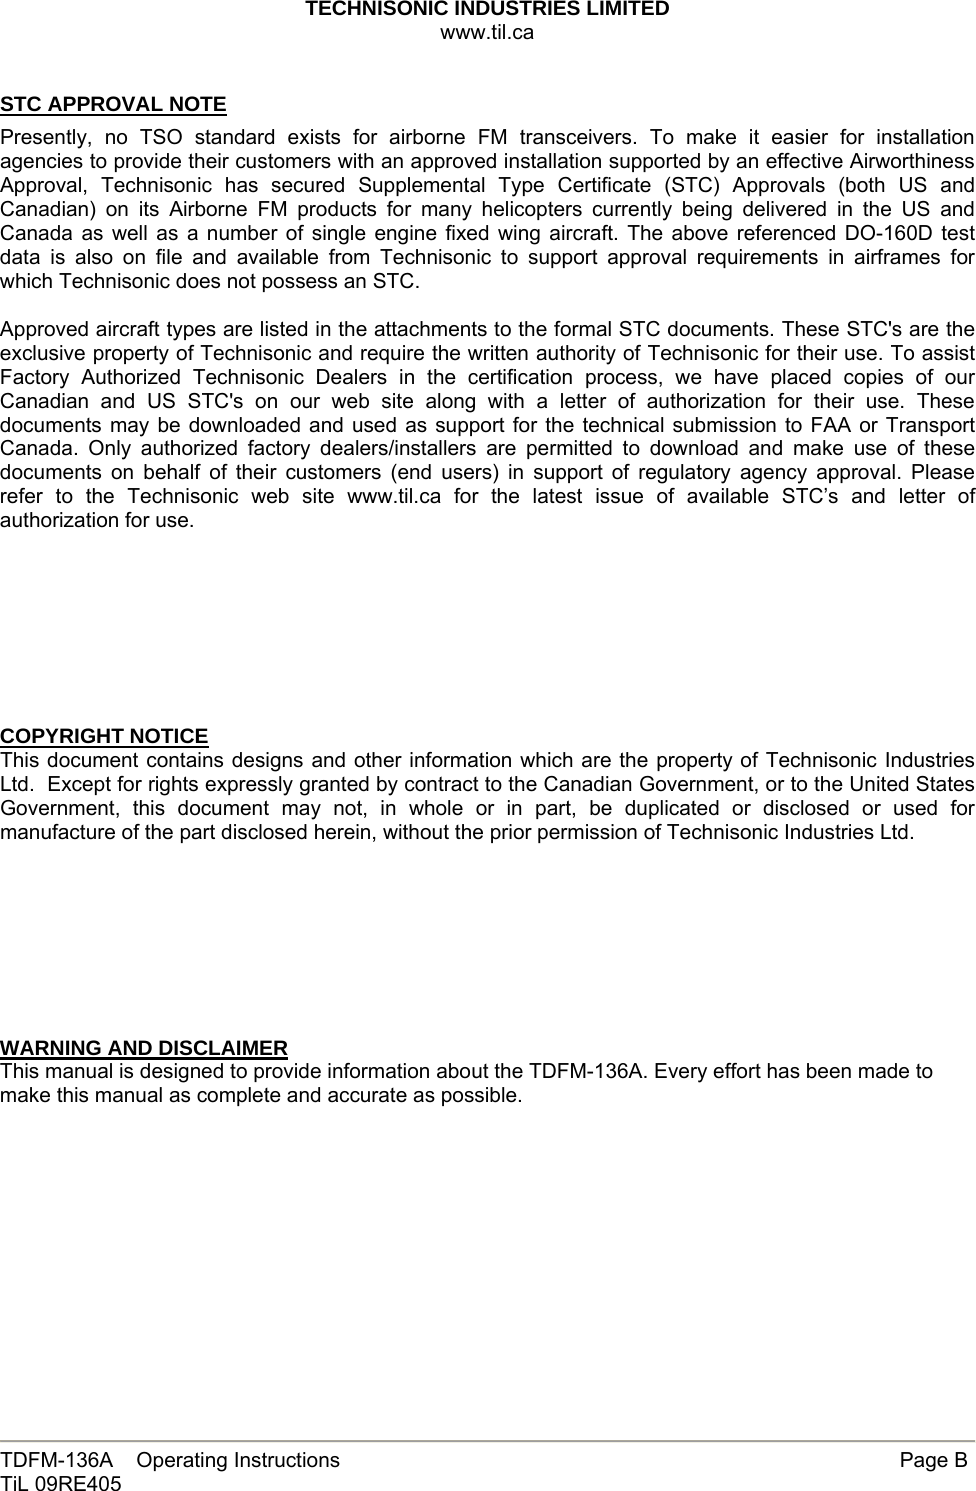 TECHNISONIC INDUSTRIES LIMITED www.til.ca   TDFM-136A    Operating Instructions        Page B TiL 09RE405   STC APPROVAL NOTE  Presently, no TSO standard exists for airborne FM transceivers. To make it easier for installation agencies to provide their customers with an approved installation supported by an effective Airworthiness Approval, Technisonic has secured Supplemental Type Certificate (STC) Approvals (both US and Canadian) on its Airborne FM products for many helicopters currently being delivered in the US and Canada as well as a number of single engine fixed wing aircraft. The above referenced DO-160D test data is also on file and available from Technisonic to support approval requirements in airframes for which Technisonic does not possess an STC.  Approved aircraft types are listed in the attachments to the formal STC documents. These STC&apos;s are the exclusive property of Technisonic and require the written authority of Technisonic for their use. To assist Factory Authorized Technisonic Dealers in the certification process, we have placed copies of our Canadian and US STC&apos;s on our web site along with a letter of authorization for their use. These documents may be downloaded and used as support for the technical submission to FAA or Transport Canada. Only authorized factory dealers/installers are permitted to download and make use of these documents on behalf of their customers (end users) in support of regulatory agency approval. Please refer to the Technisonic web site www.til.ca for the latest issue of available STC’s and letter of authorization for use.         COPYRIGHT NOTICE This document contains designs and other information which are the property of Technisonic Industries Ltd.  Except for rights expressly granted by contract to the Canadian Government, or to the United States Government, this document may not, in whole or in part, be duplicated or disclosed or used for manufacture of the part disclosed herein, without the prior permission of Technisonic Industries Ltd.         WARNING AND DISCLAIMER This manual is designed to provide information about the TDFM-136A. Every effort has been made to make this manual as complete and accurate as possible.         